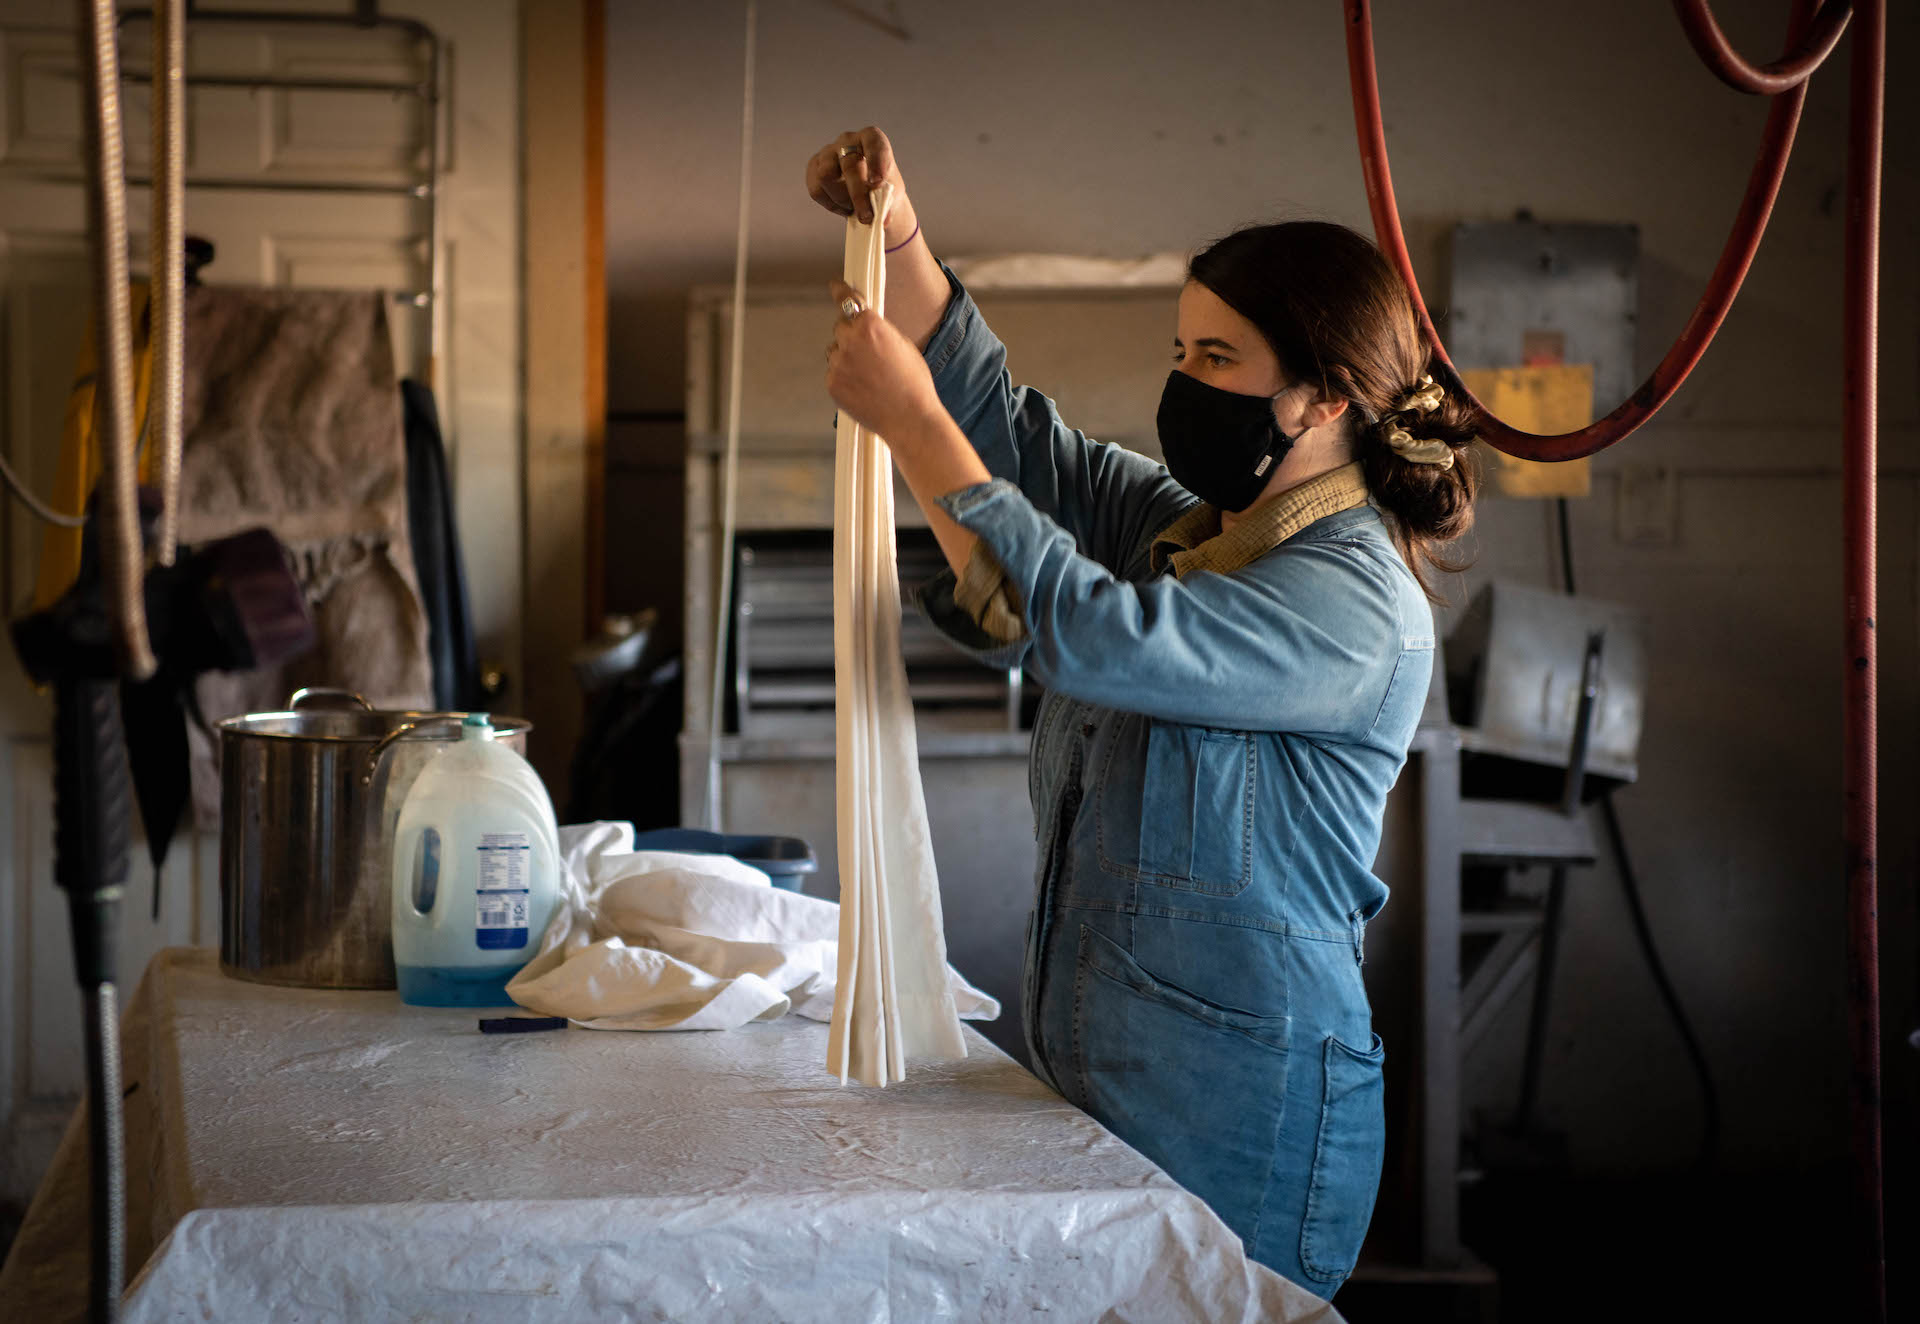 Winona Quigley stands in the frame in her denim coveralls, folding and holding taut a piece of cream colored fabric over a plastic covered workbench. A large stainless steel pot and a large tub of blue detergent sit on the far end of the work bench.